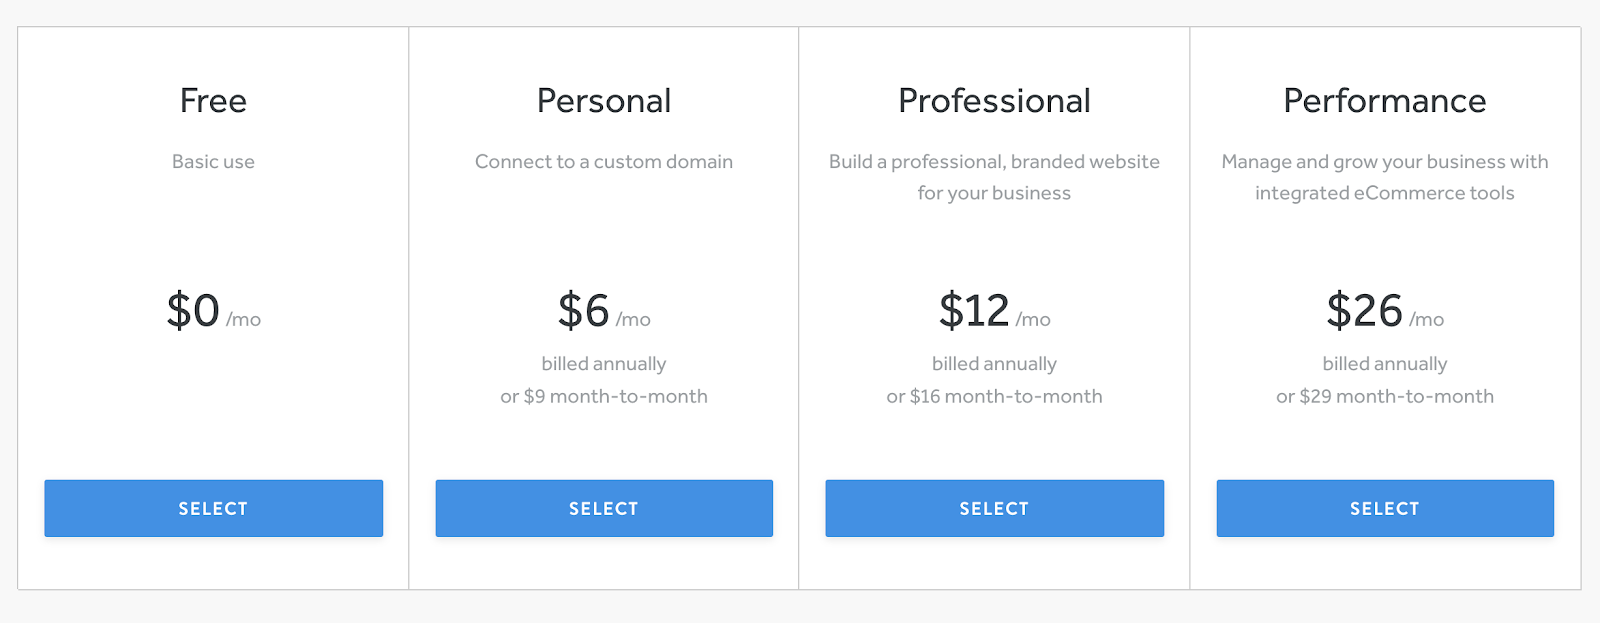 Weebly Pricing Plans (Comparison Table)